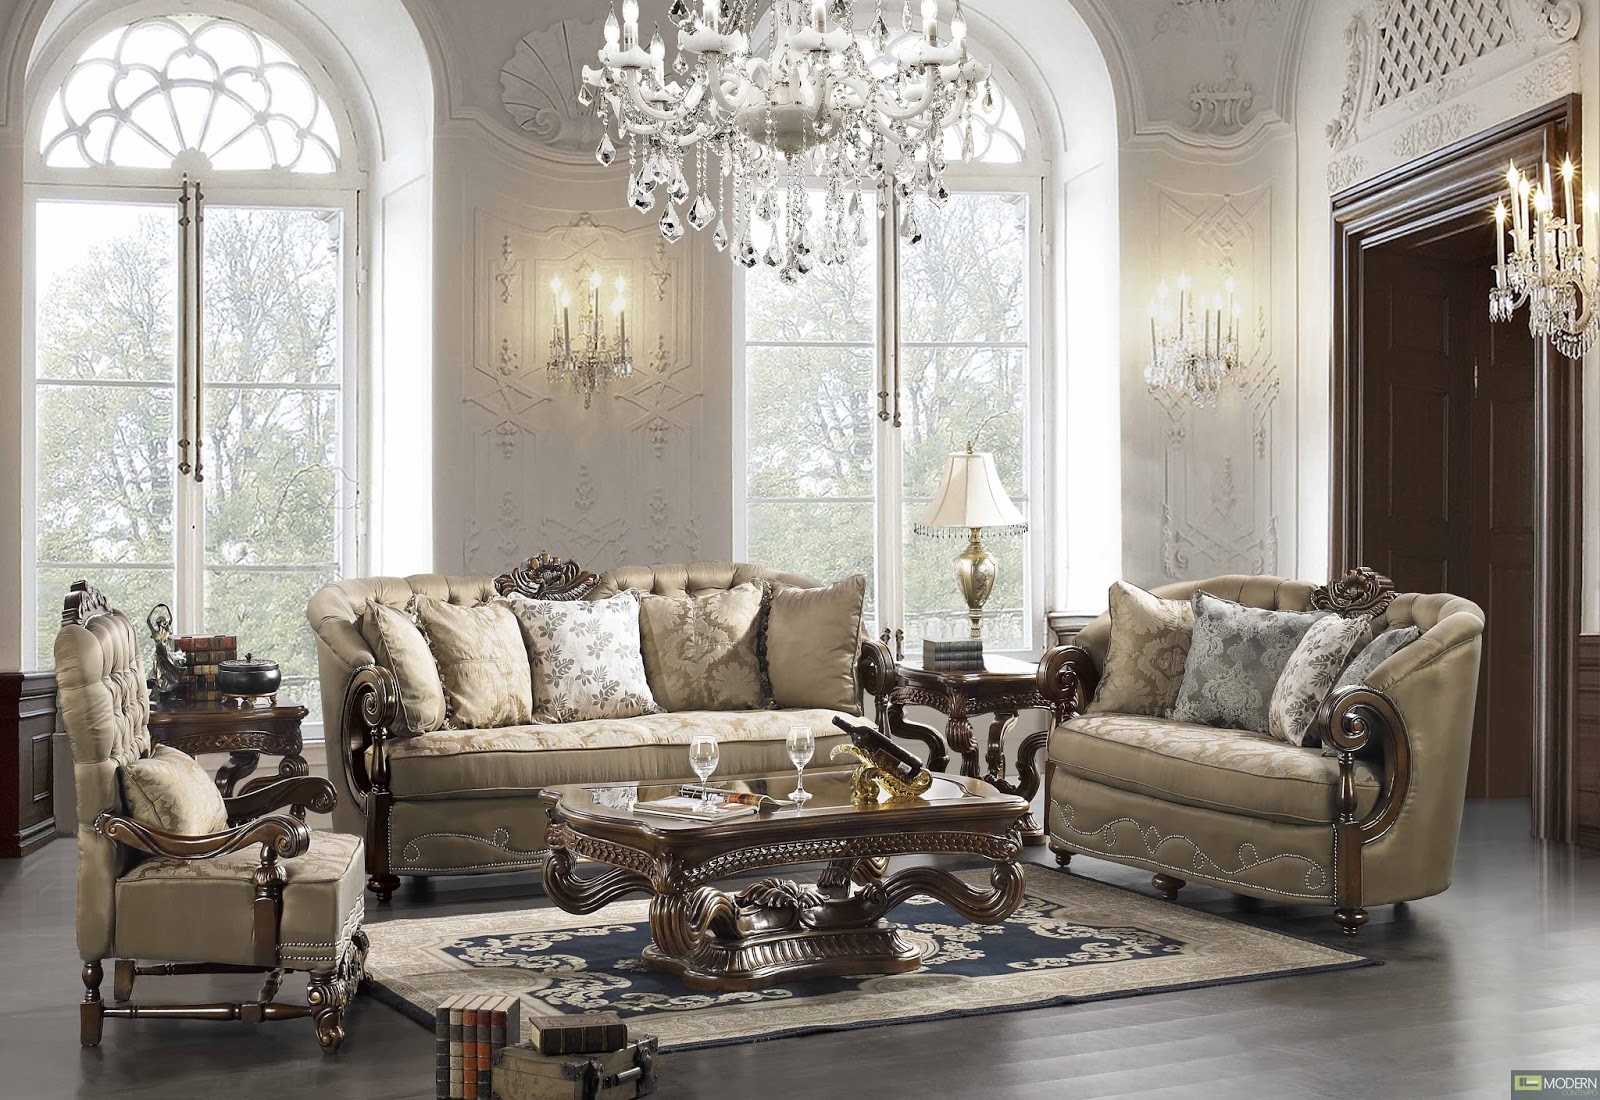 Best Furniture Ideas for Home Traditional Classic 